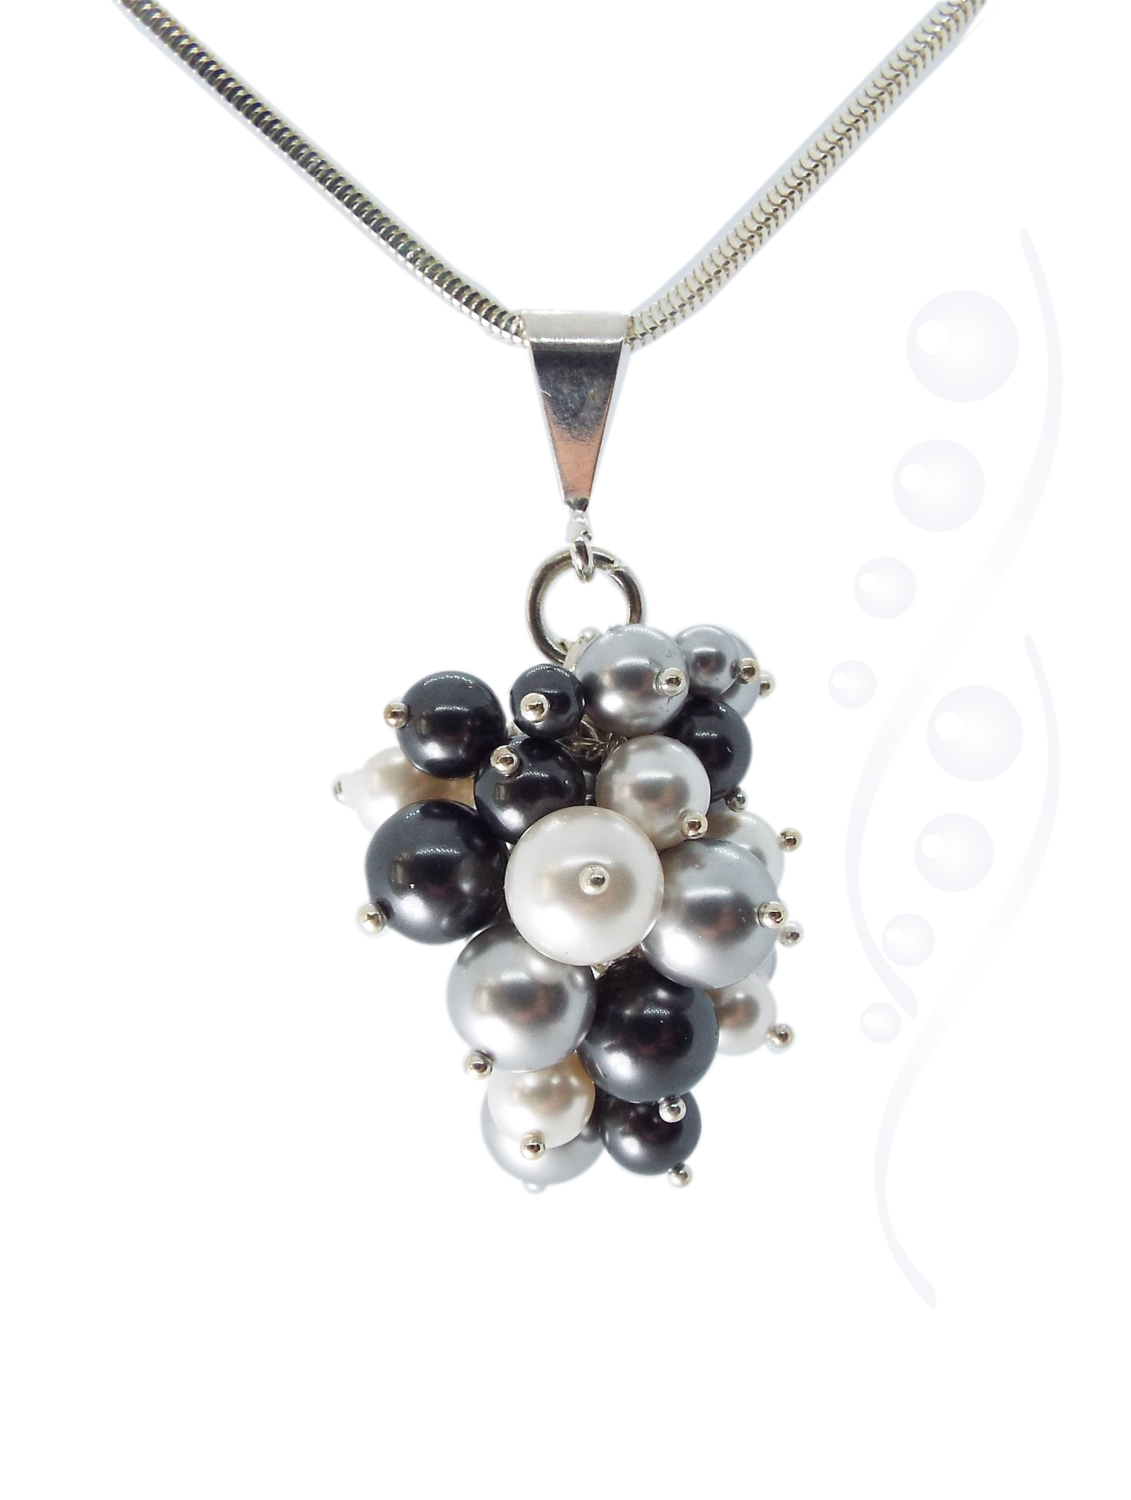 Black and White Pearl Pendant Necklace - Large - with Swarovski Crystal Pearls